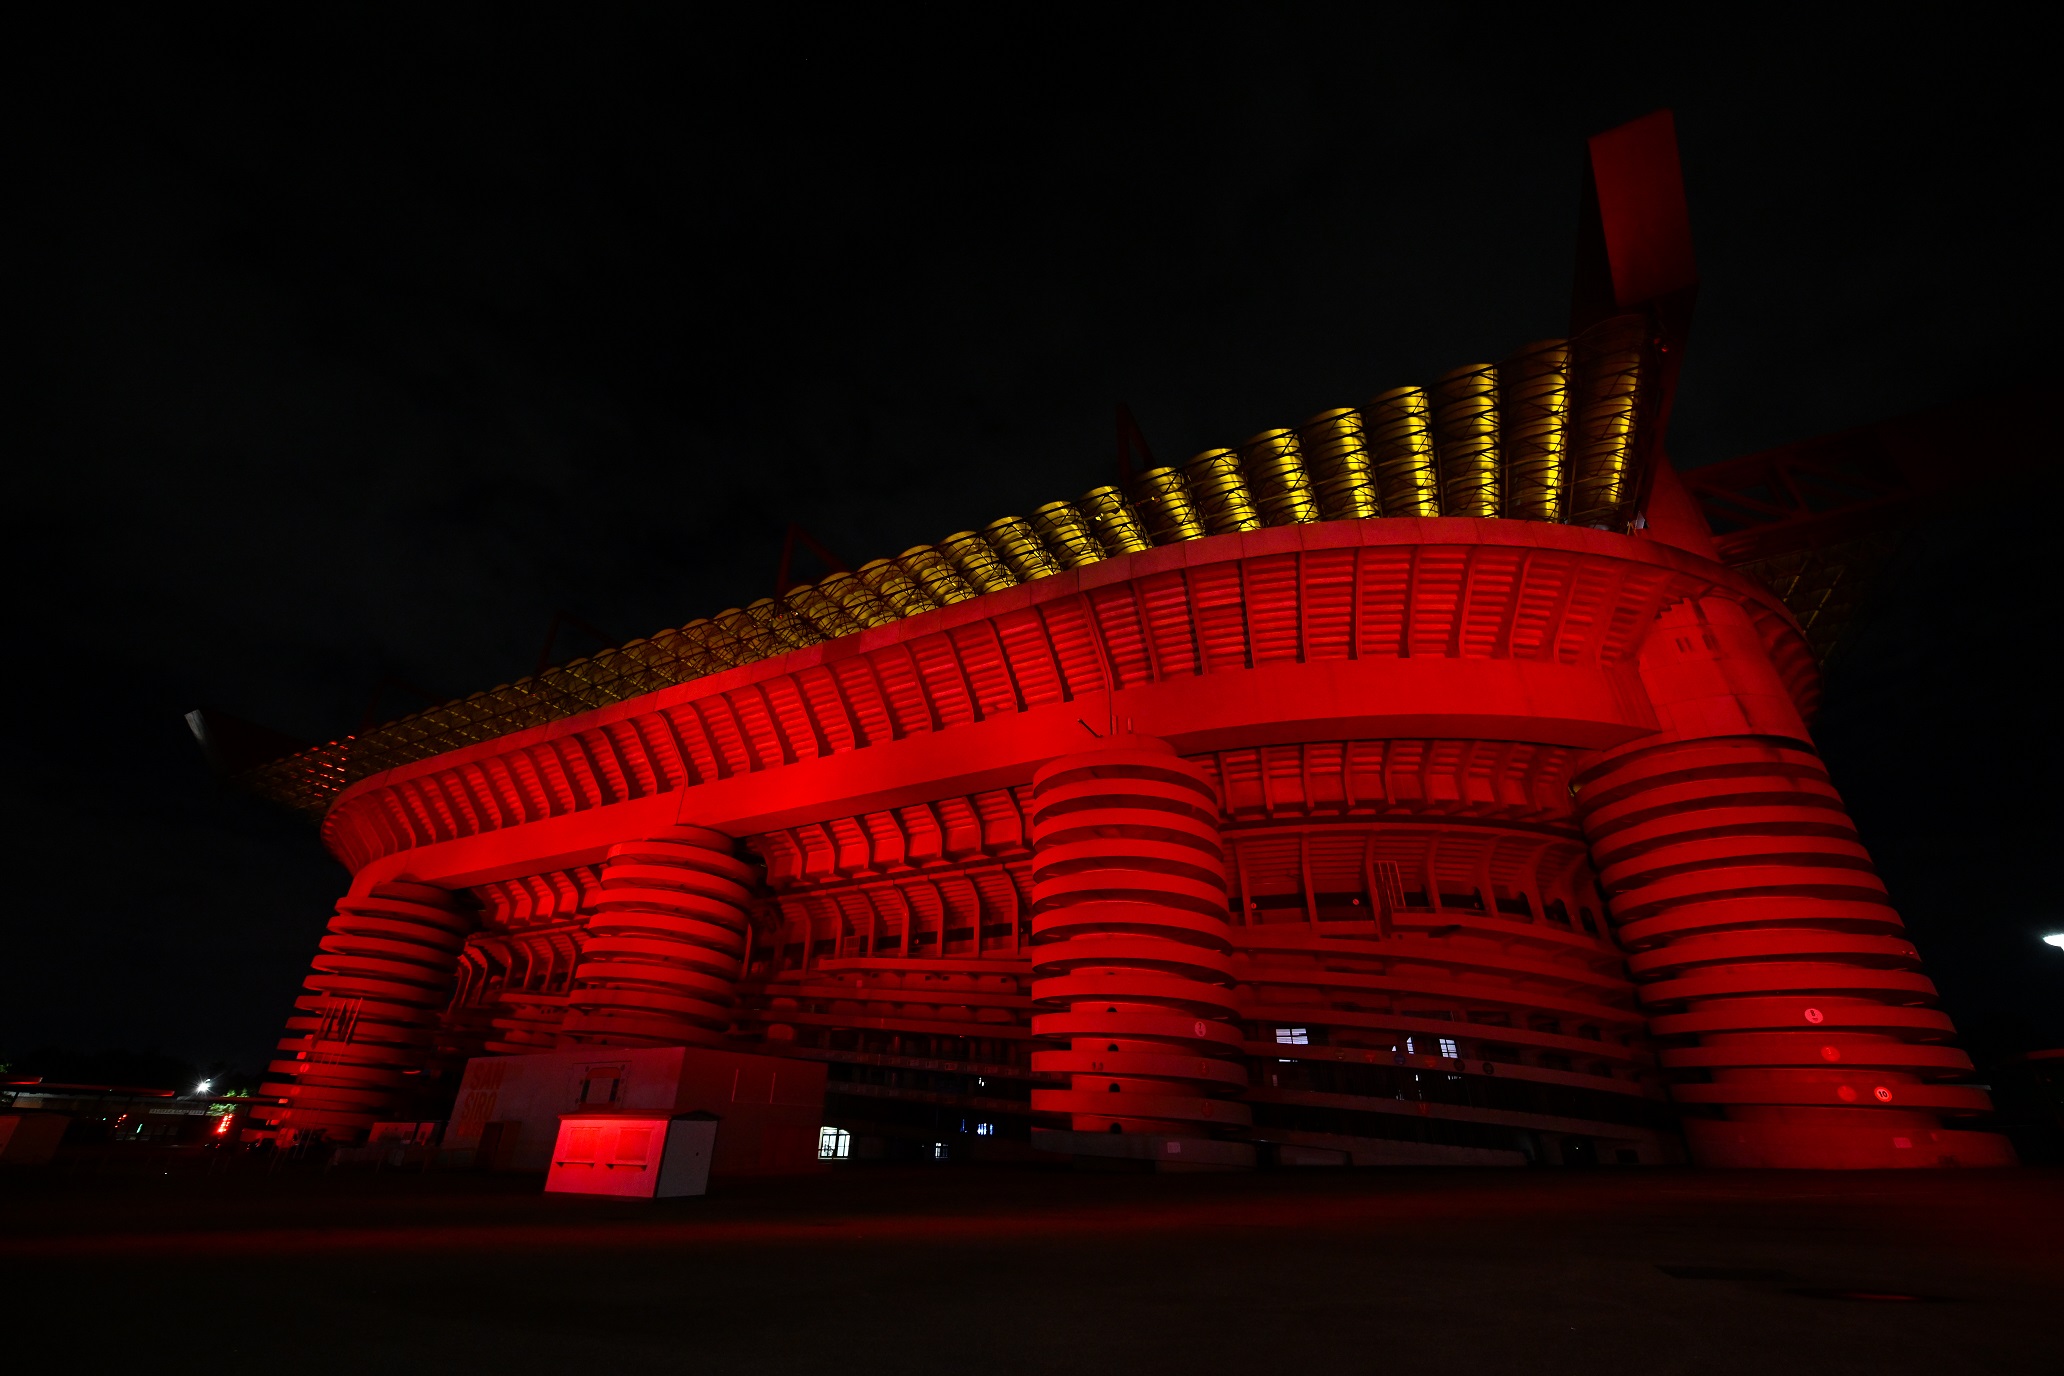 AC Milan first blow over Inter, the world red and black campaign - Inside World Football